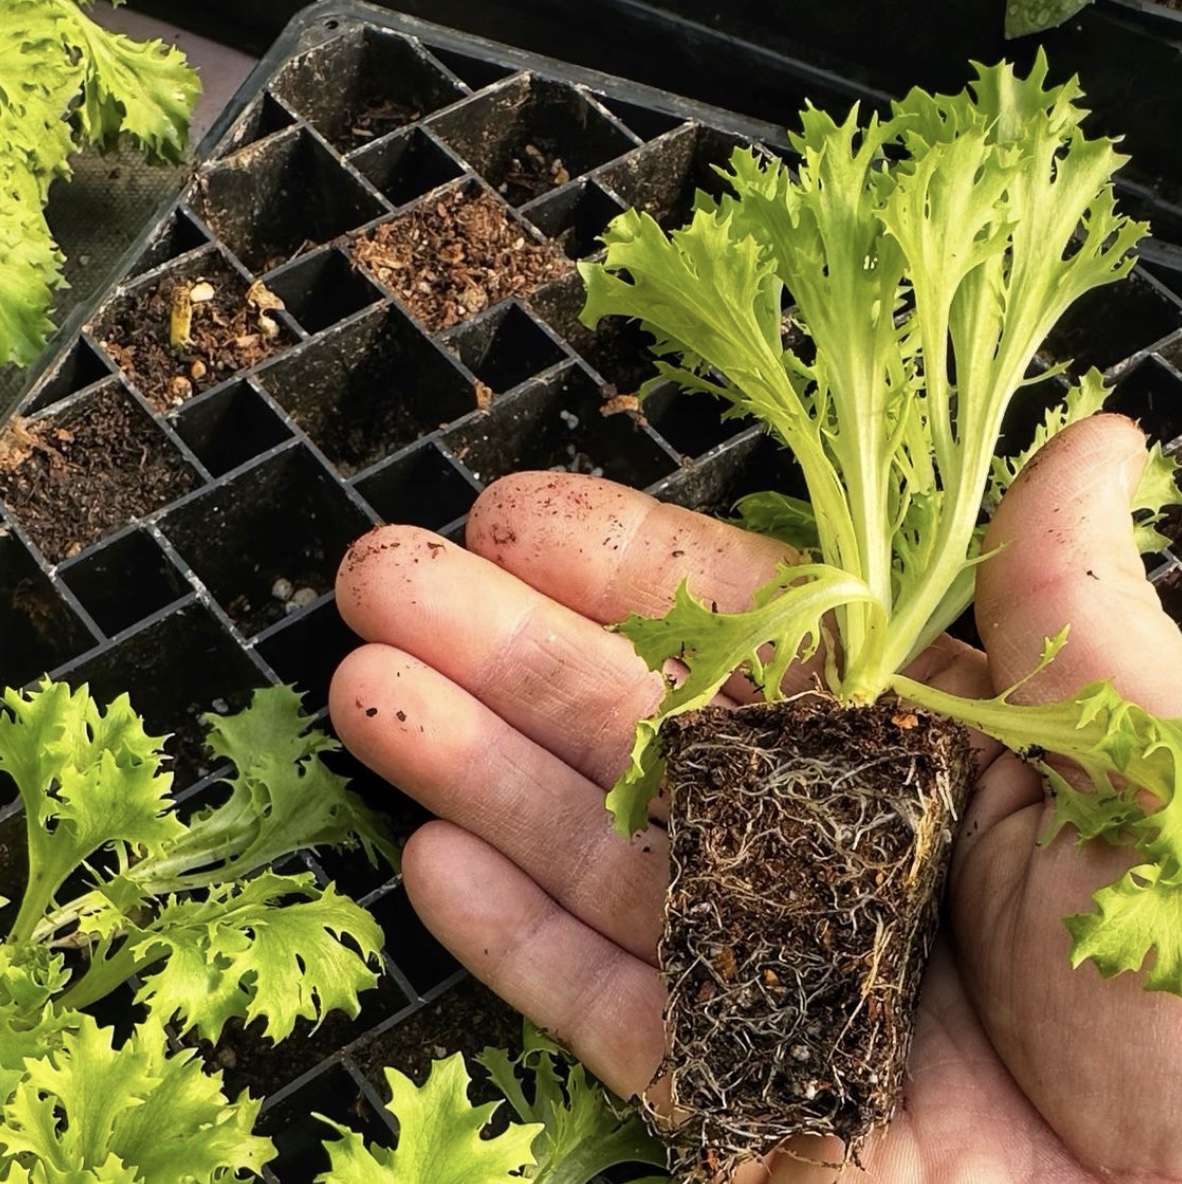 hand holding a seedling over a tray of plants